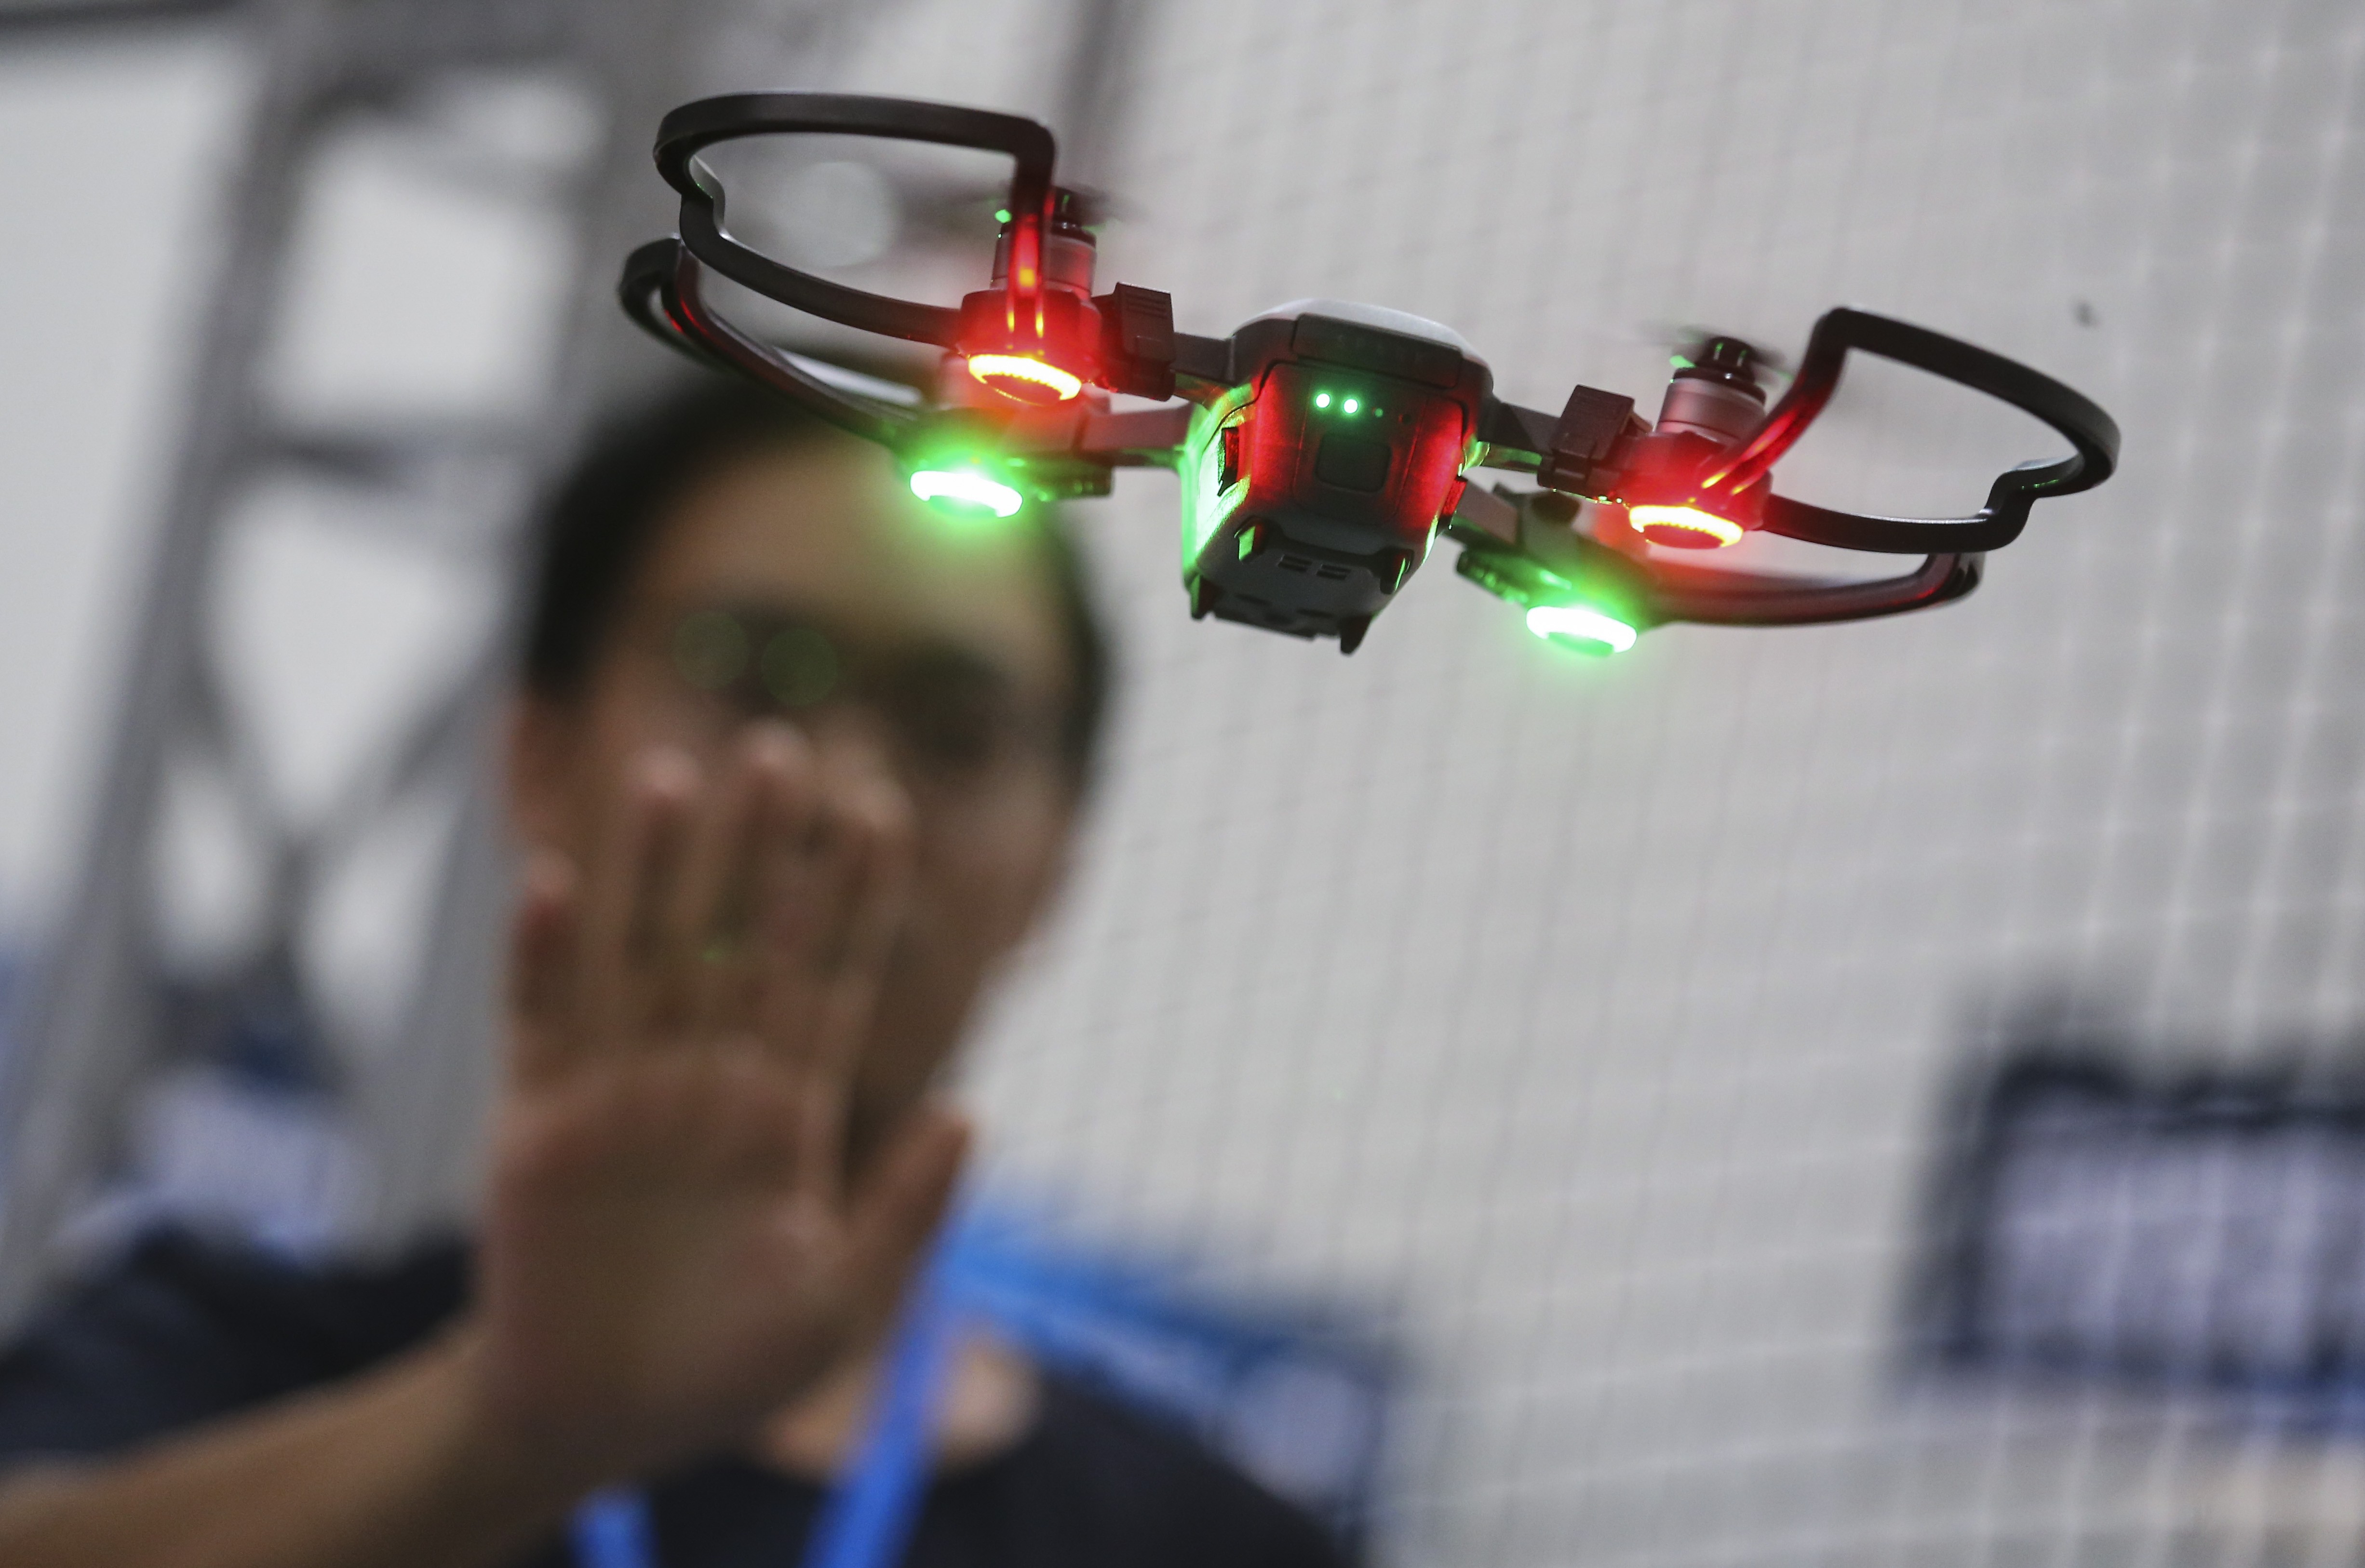 The world’s first drone with flight controlled by hand gestures was one of the attractions at the Computer and Communications Festival which opened yesterday. Photo: Dickson Lee